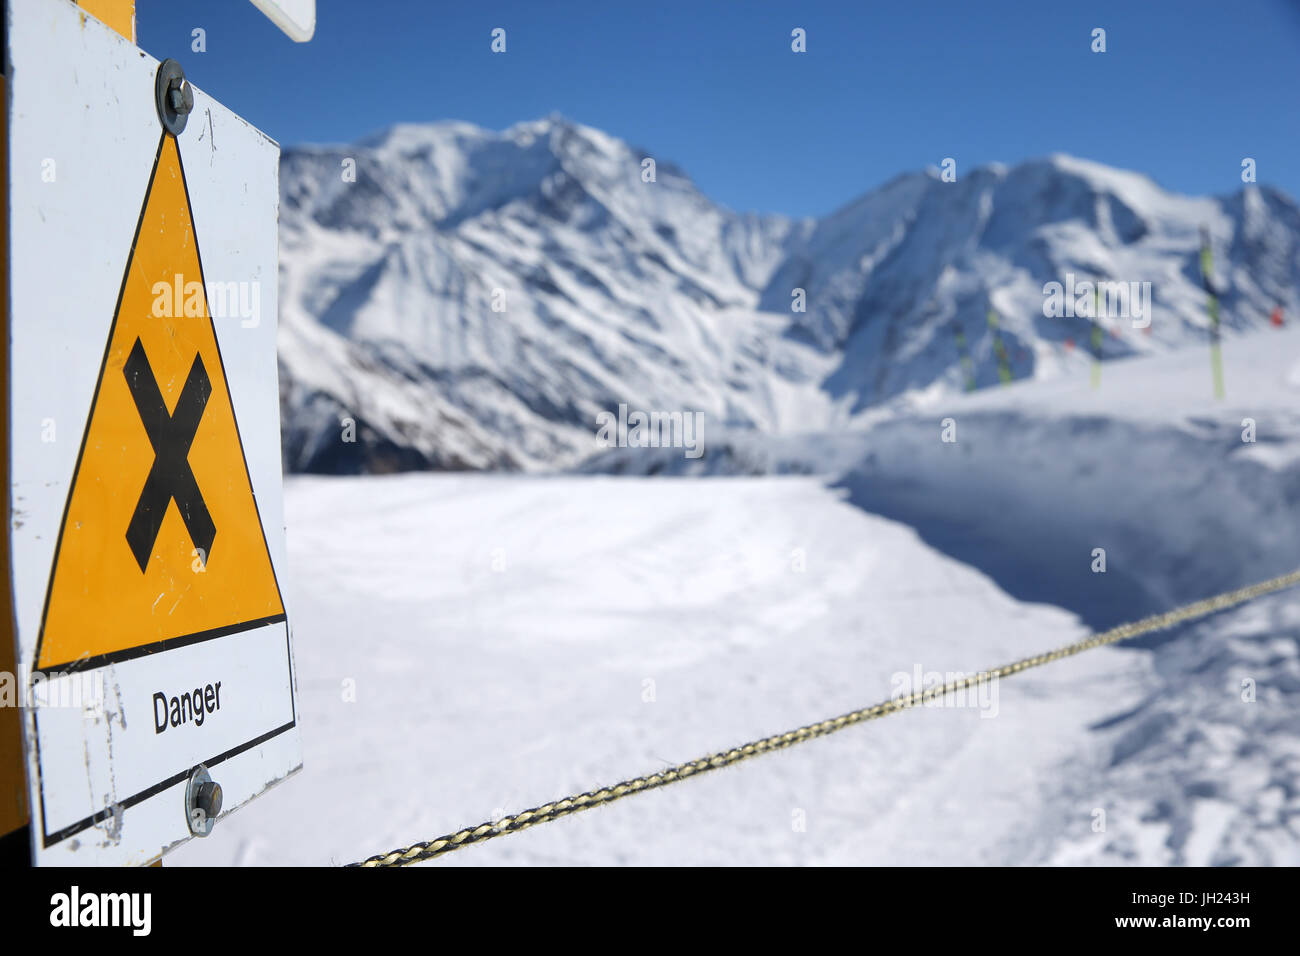 French Alps. Skiers danger sign and rope. France. Stock Photo